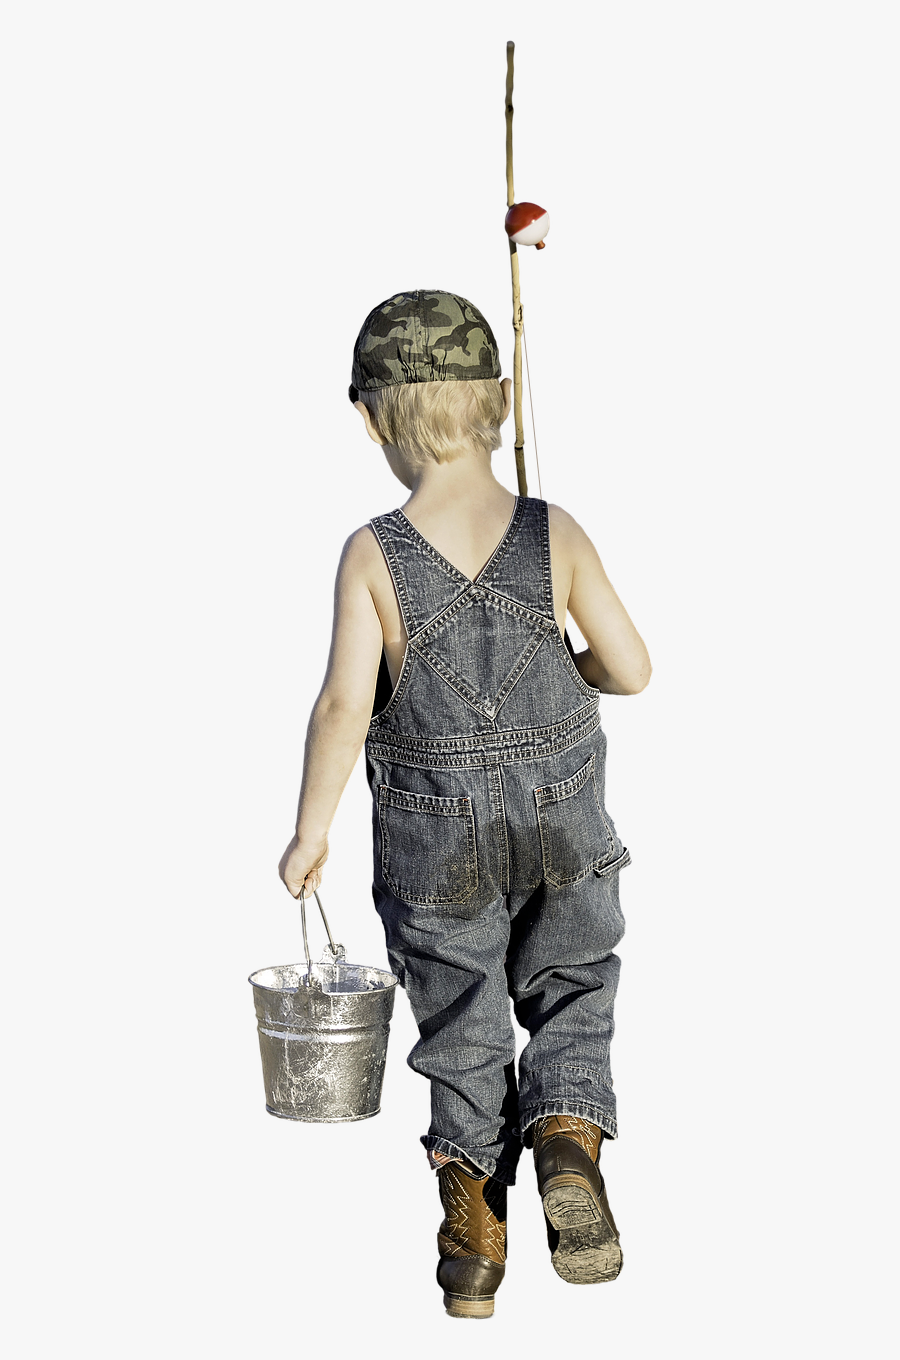 Child Bucket Fishing Rod - Child Fishing Png, Transparent Clipart